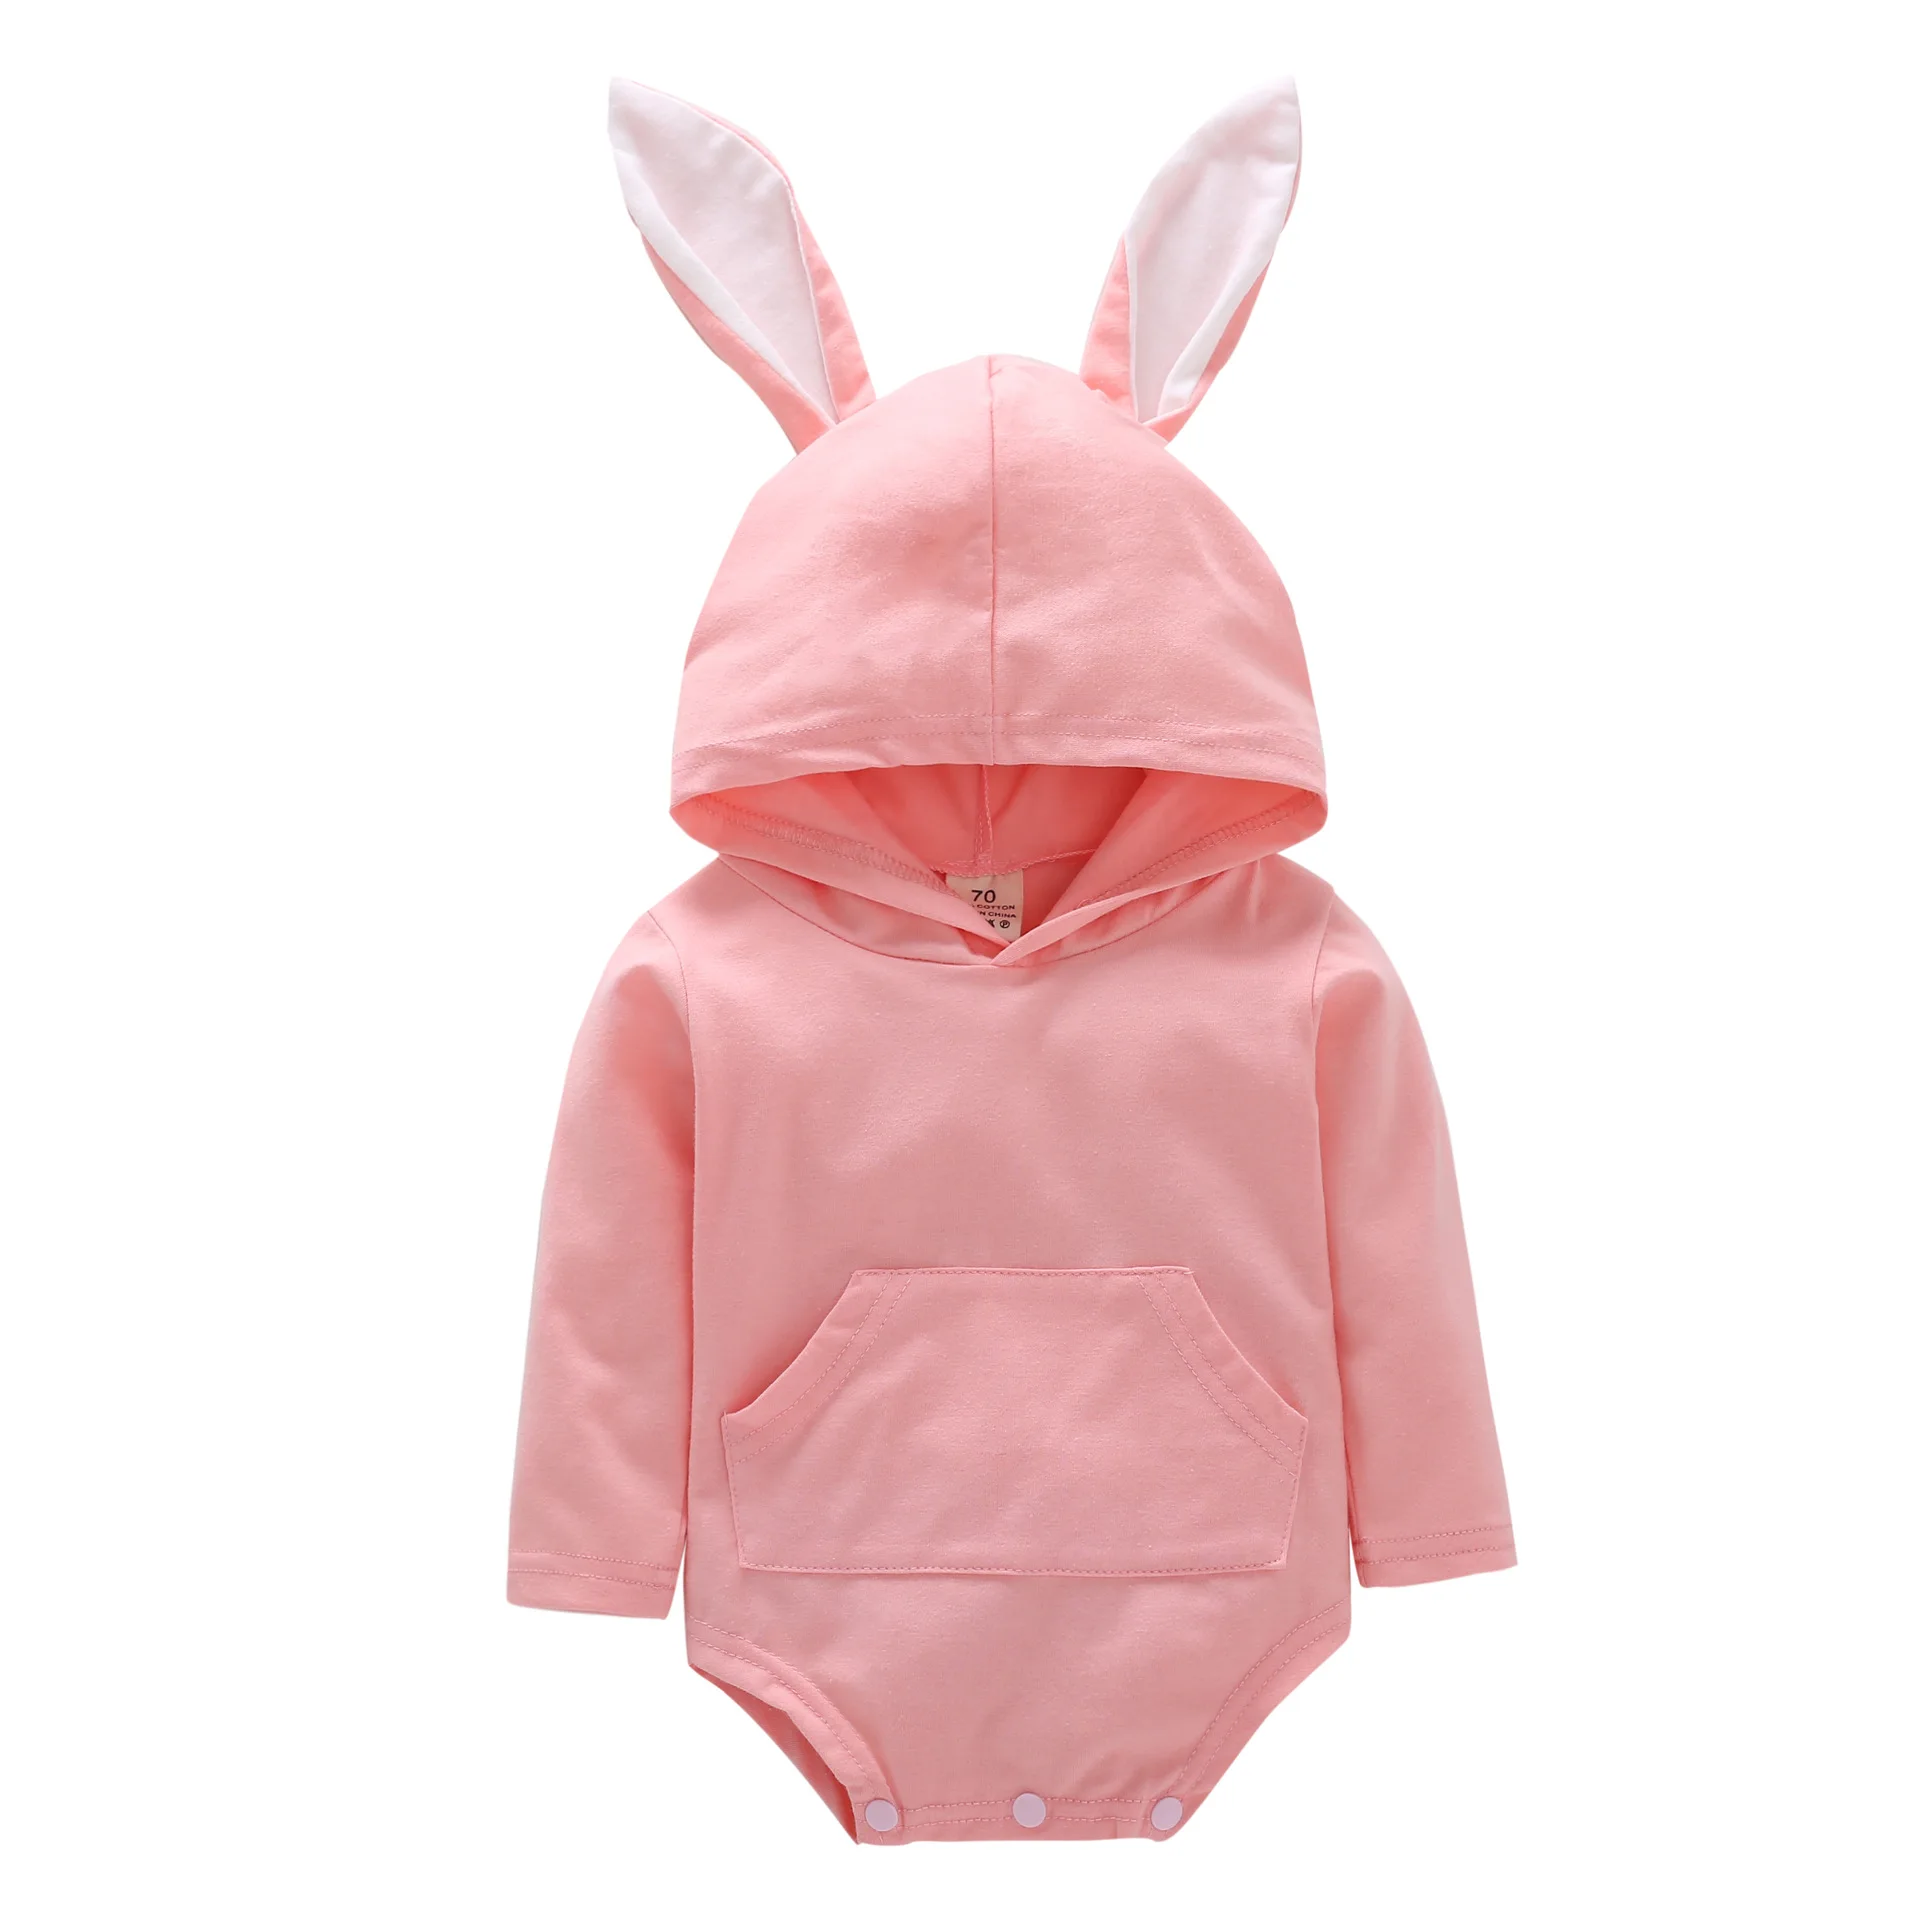 

2020 Wholesale New Arrival Baby Bunny Ear Hoodie Onesie Baby Cotton Romper, As pictures shown